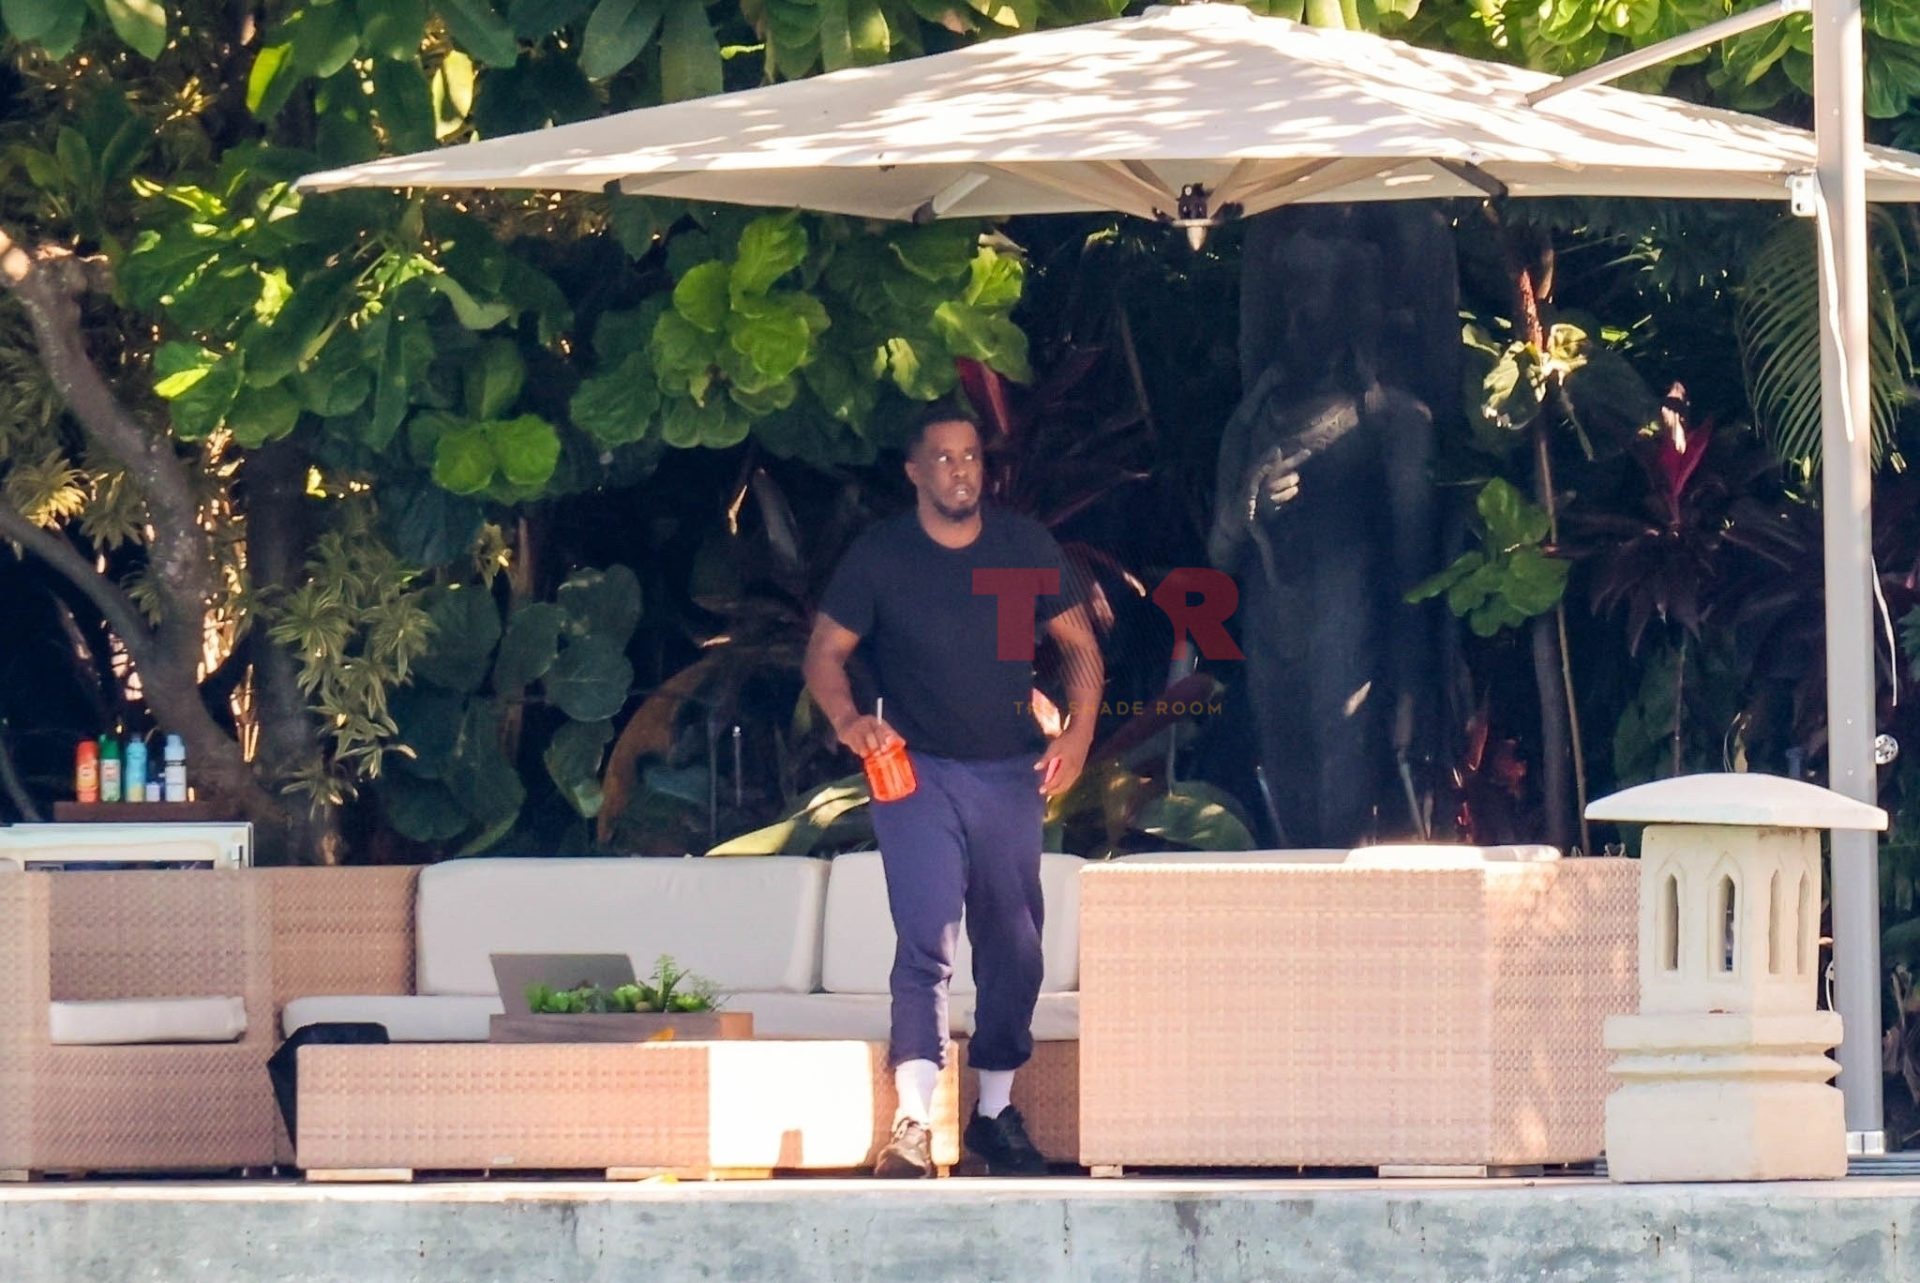 Diddy Pictured For The First Time Since Cassie Lawsuit & Settlement (Exclusive Photos)